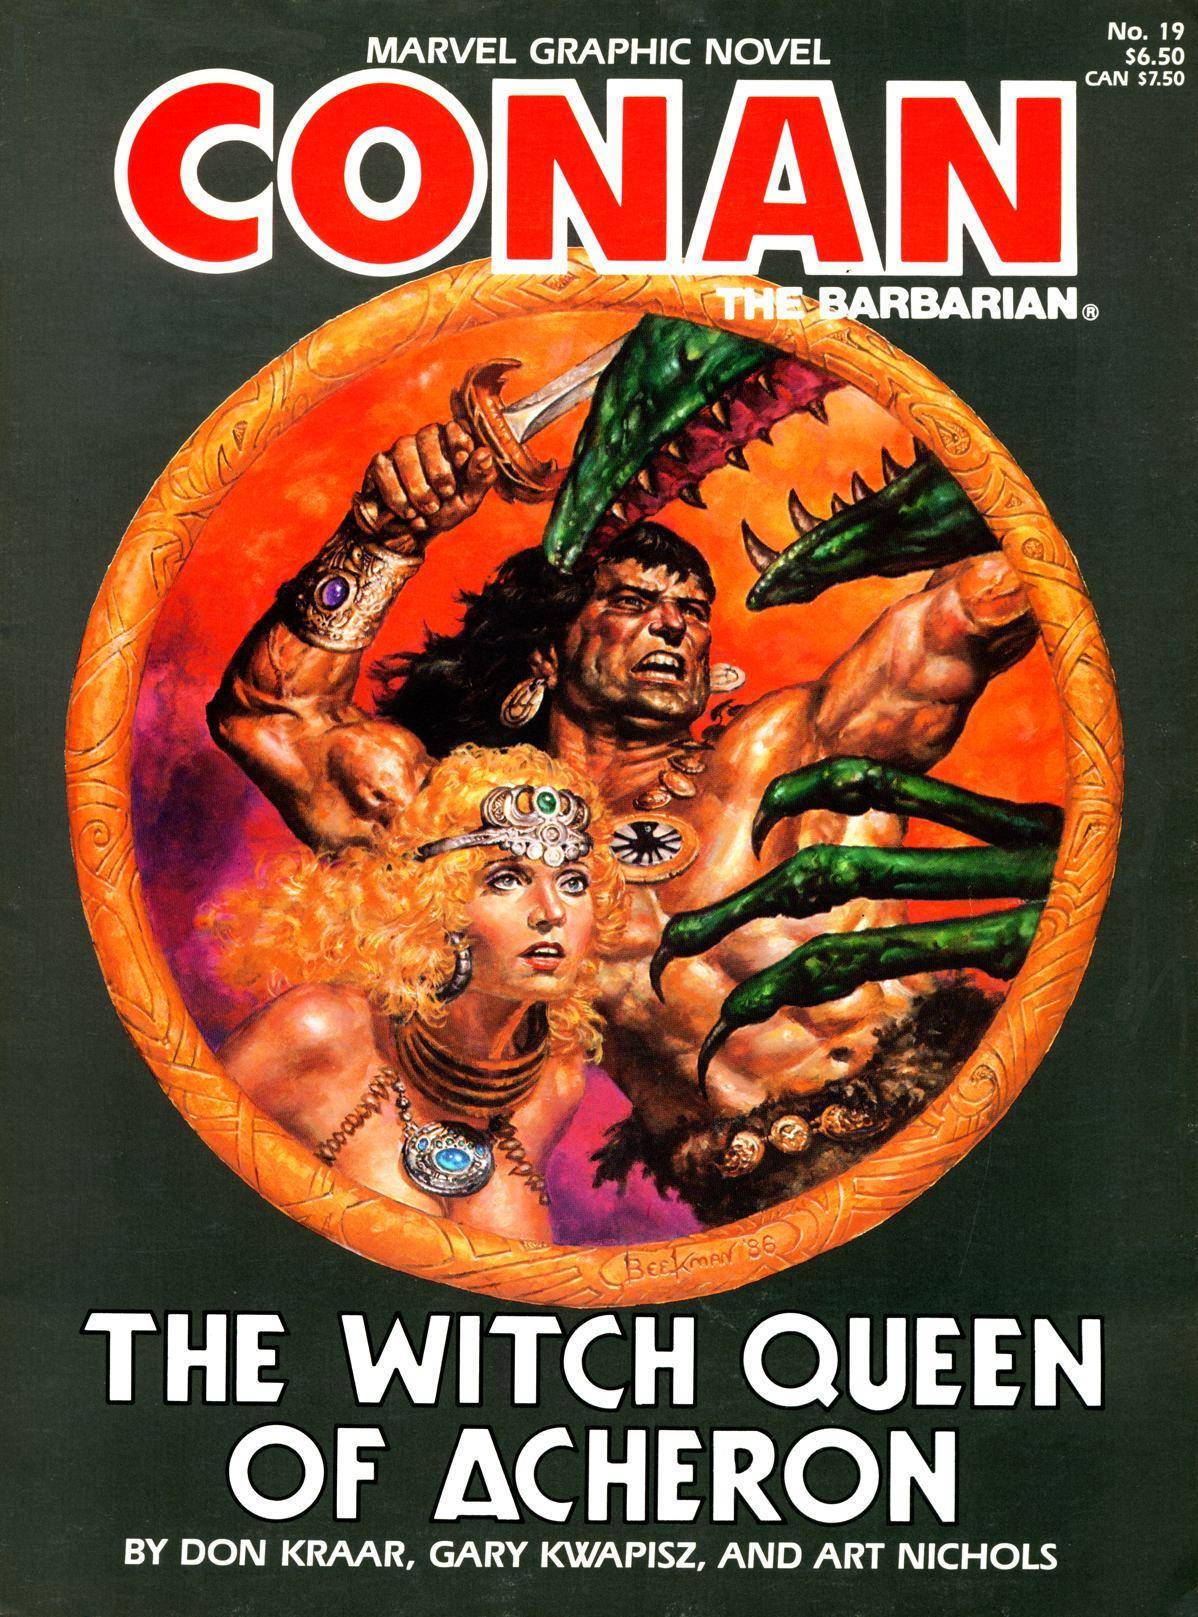 Marvel Graphic Novel 19 - The Witch Queen of Acheron 1985